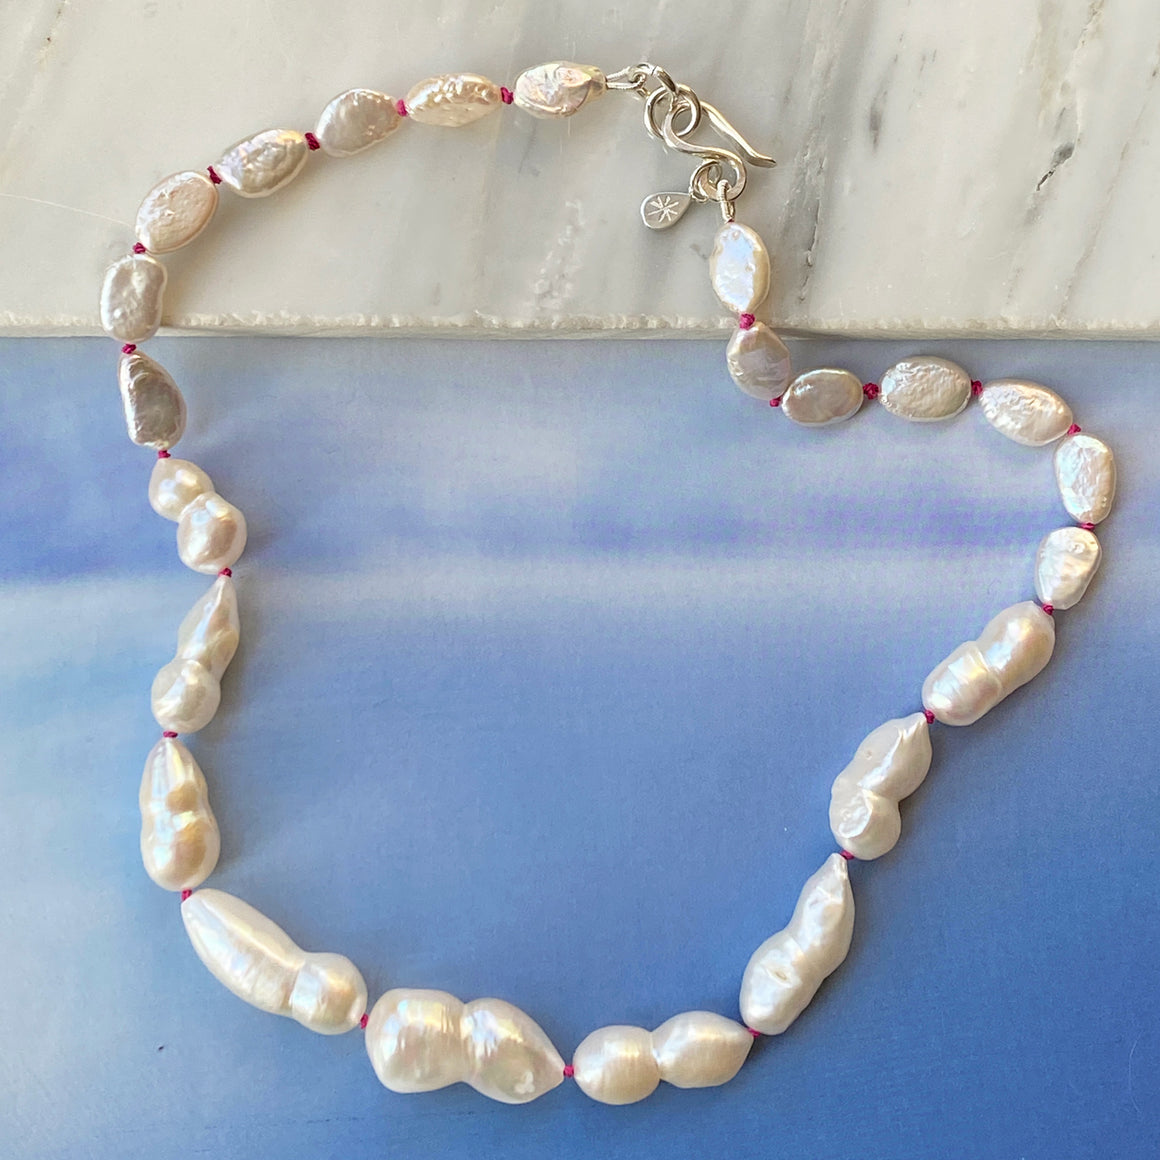 Baroque Pearl Knotted Necklace